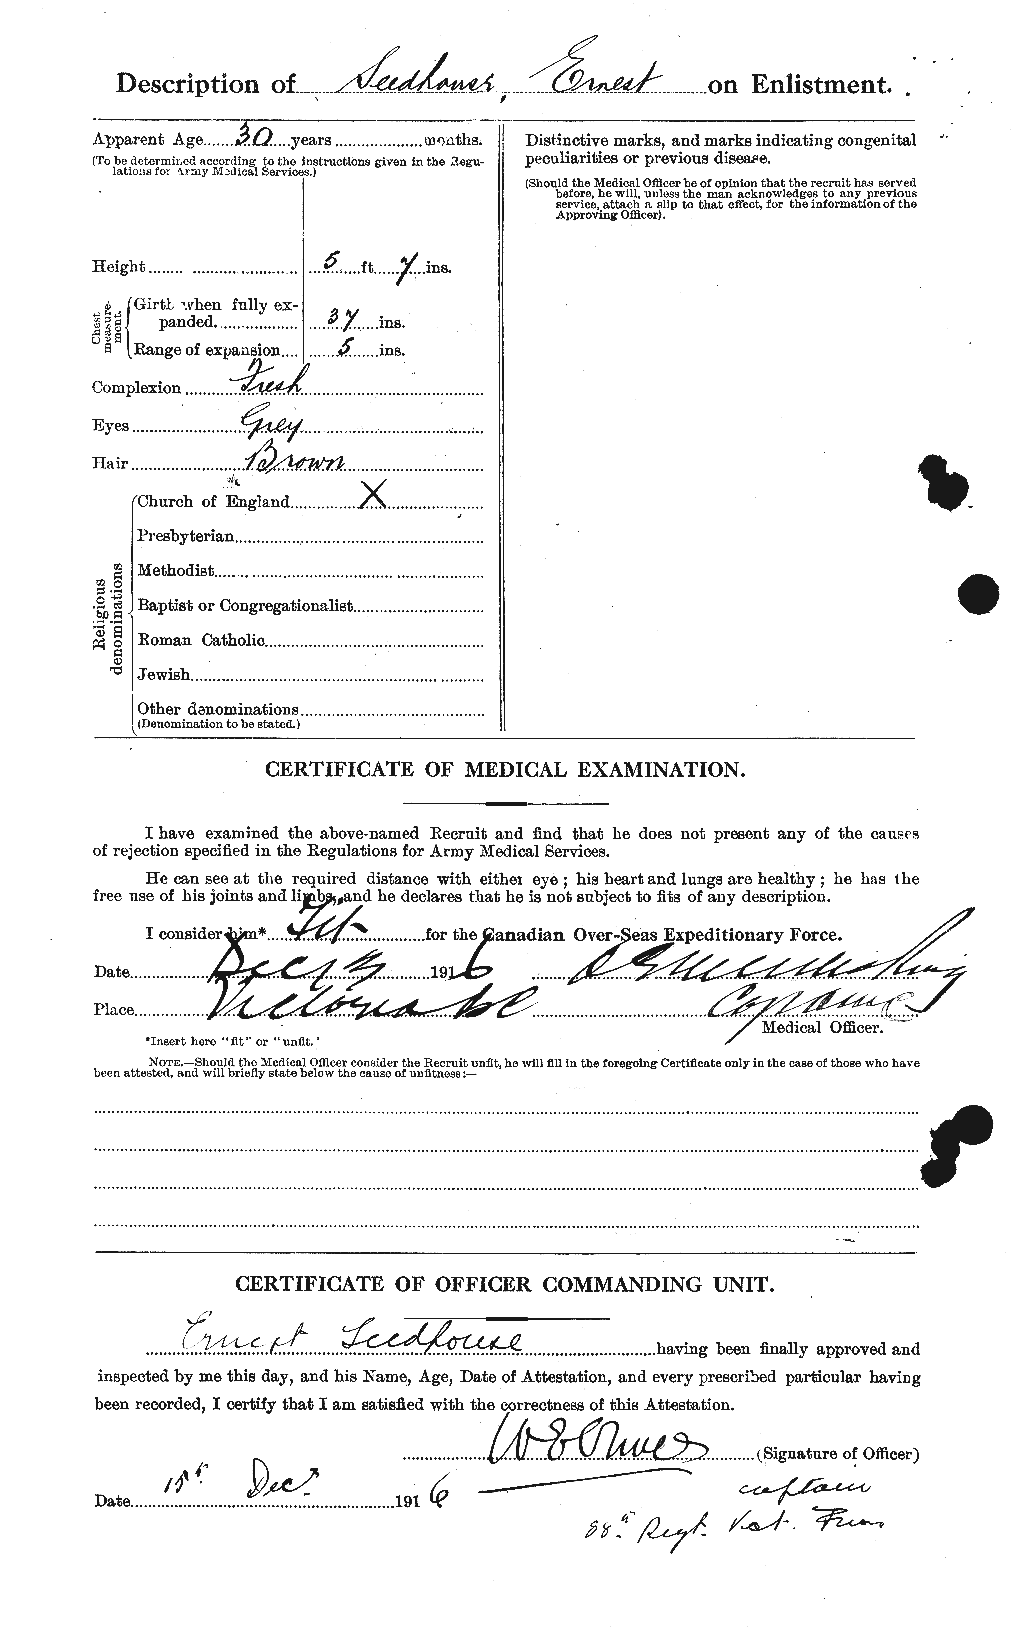 Personnel Records of the First World War - CEF 084493b